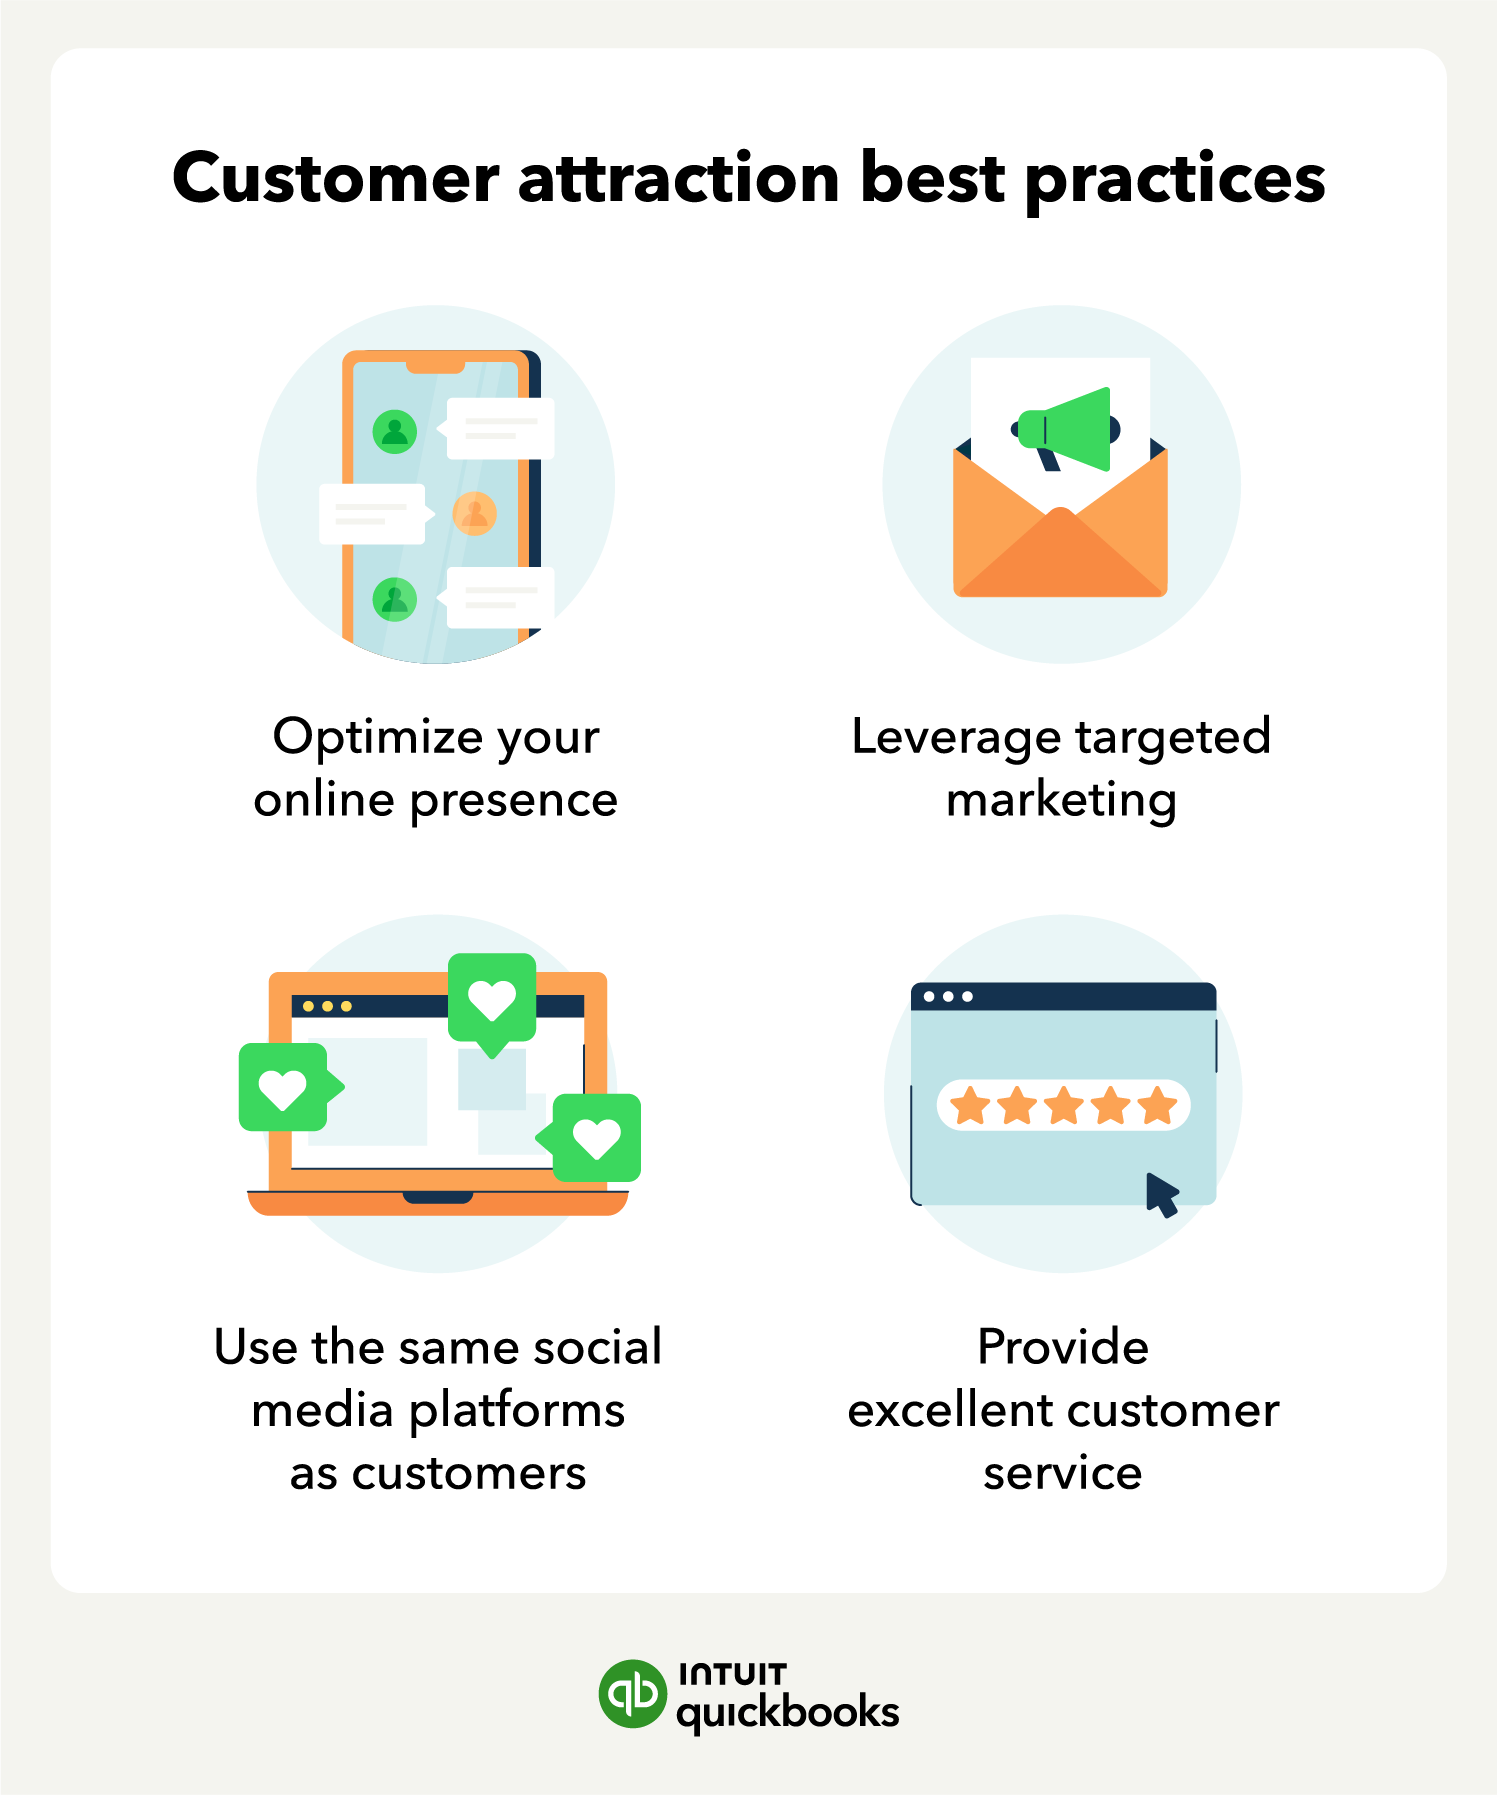 An illustration of the customer attraction best practices, such as leveraging targeted marketing and providing excellent customer service.